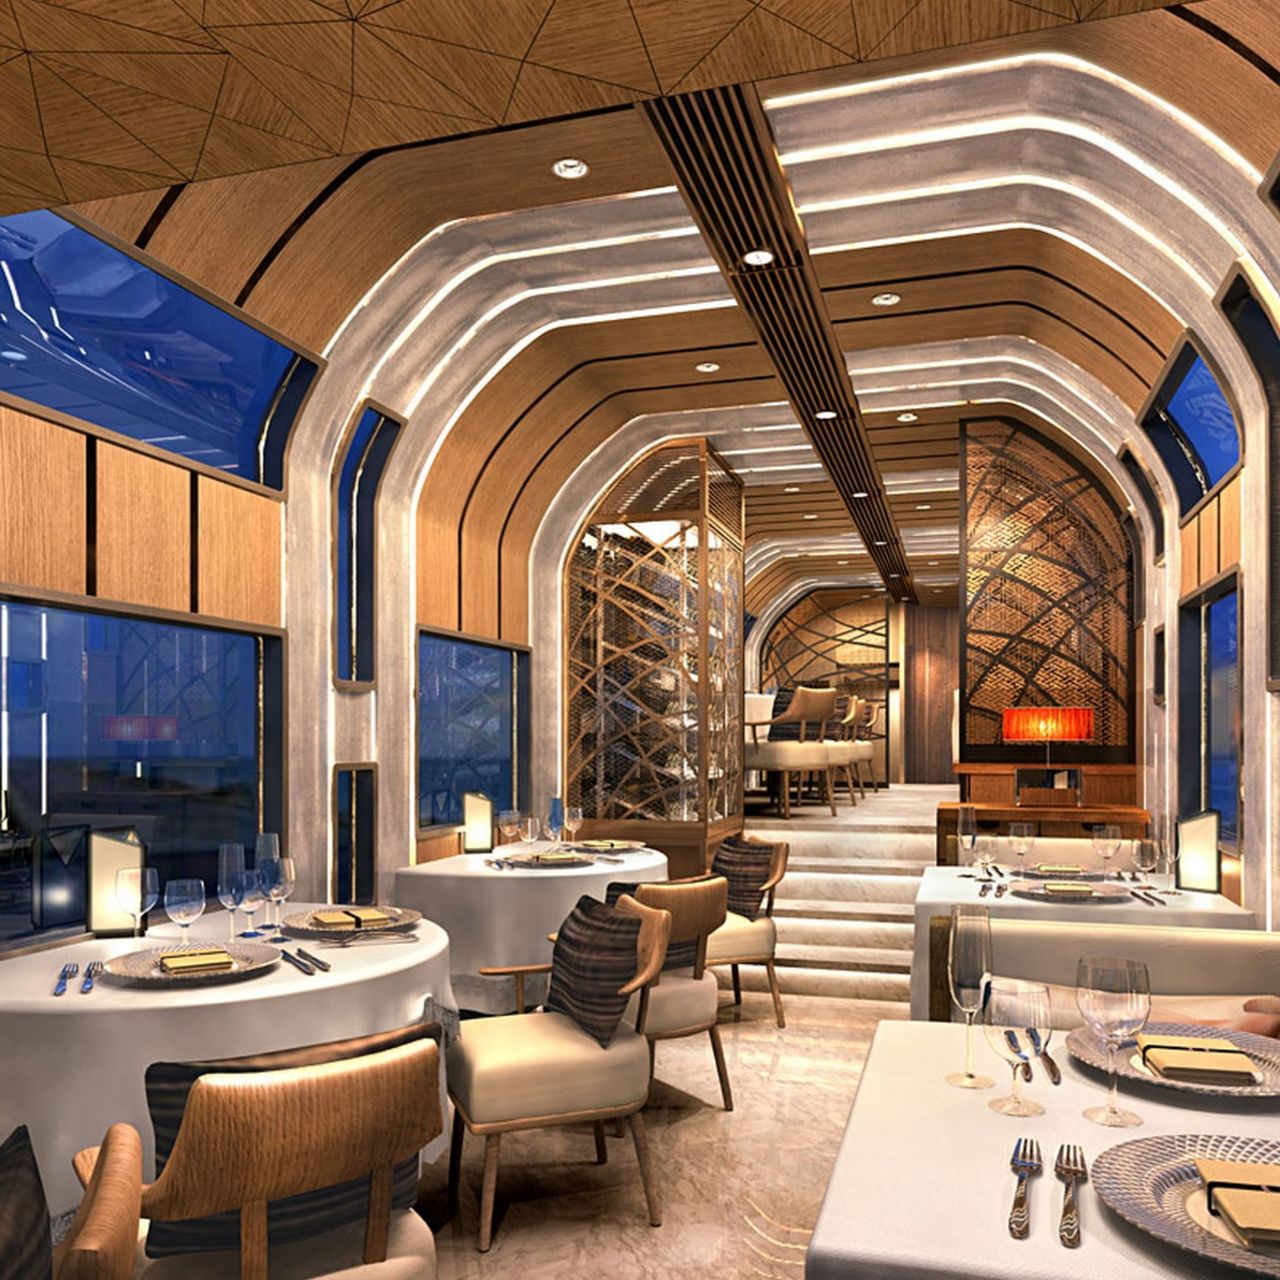 The Cruise Train's 10 carriages include five suites, one deluxe suite, two glass-walled observation cars, a dining car and lounge. 